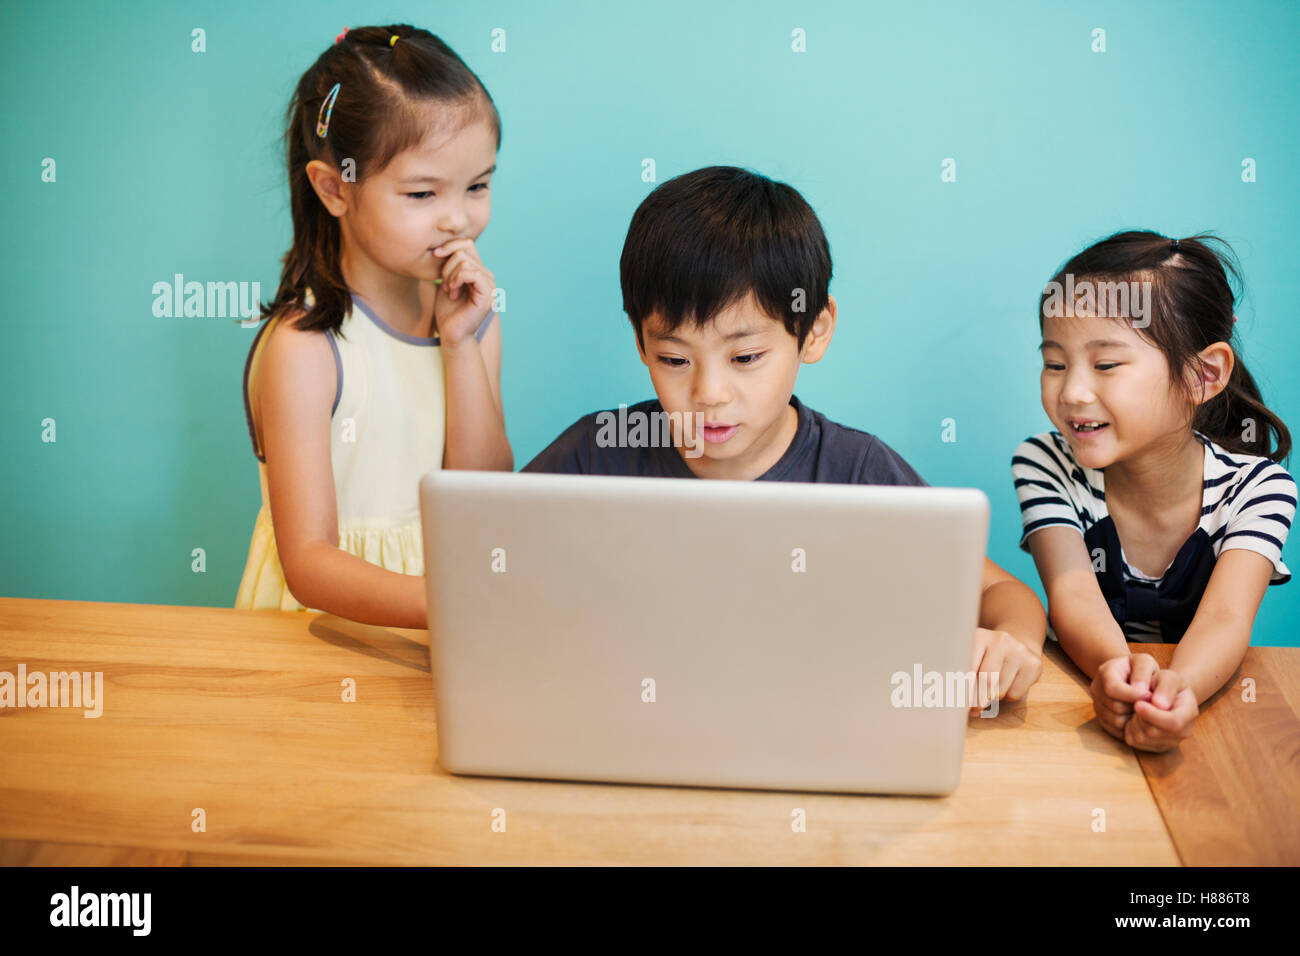 A group of children in school, three children sharing a laptop computer. Stock Photo